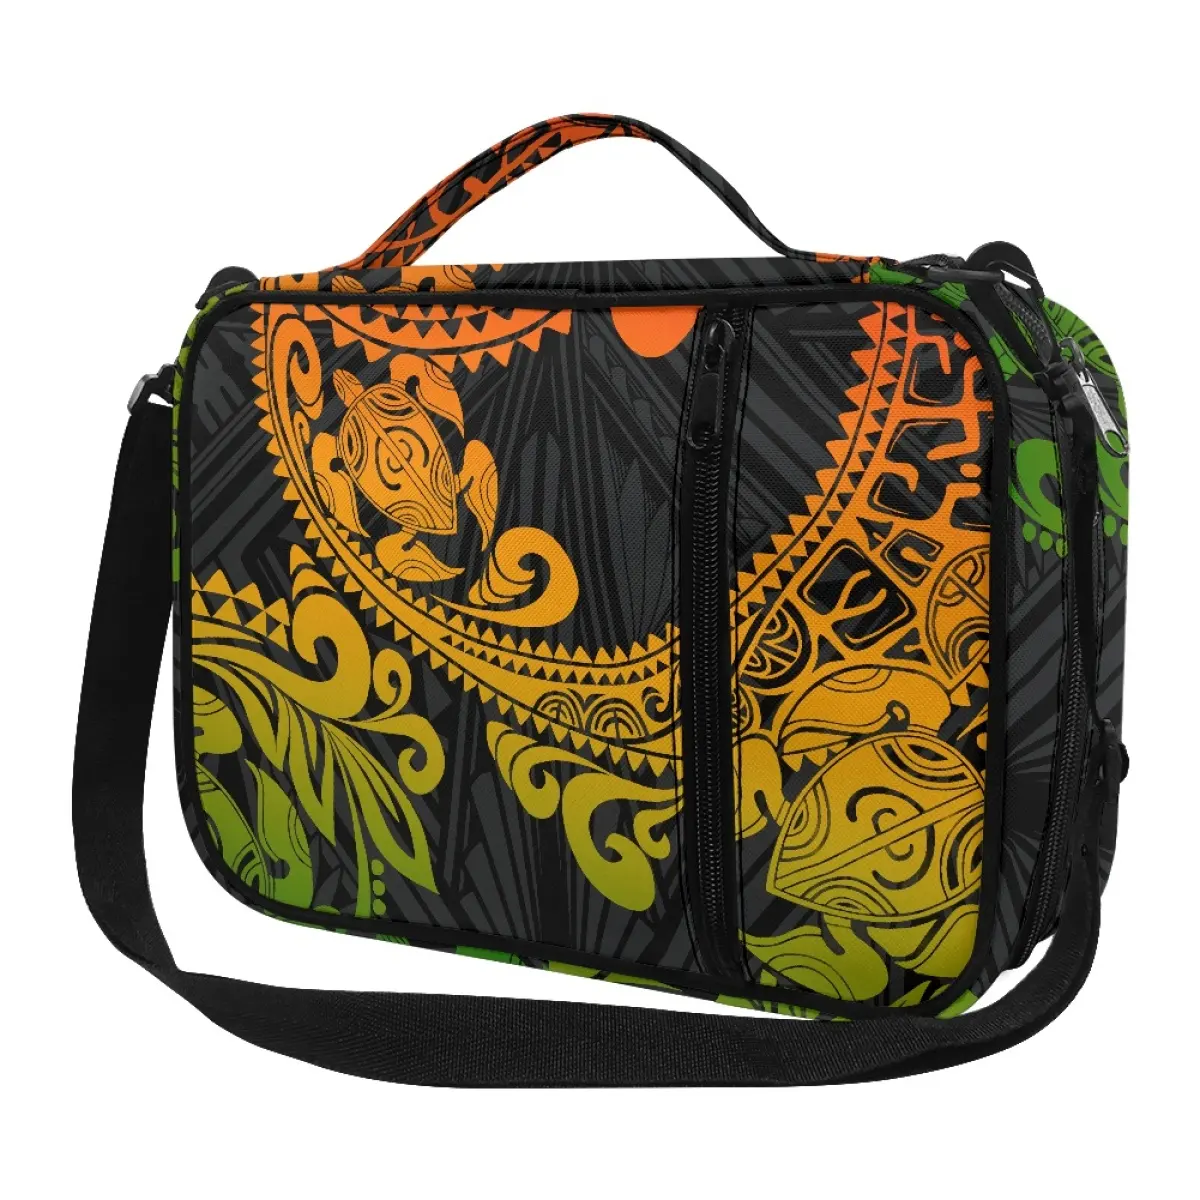 Polynesian Tribal Carry Storage Bible Bag Multiple Pockets Church Handbags with Shoulder Strap Custom Bible Cover Book Holy Case